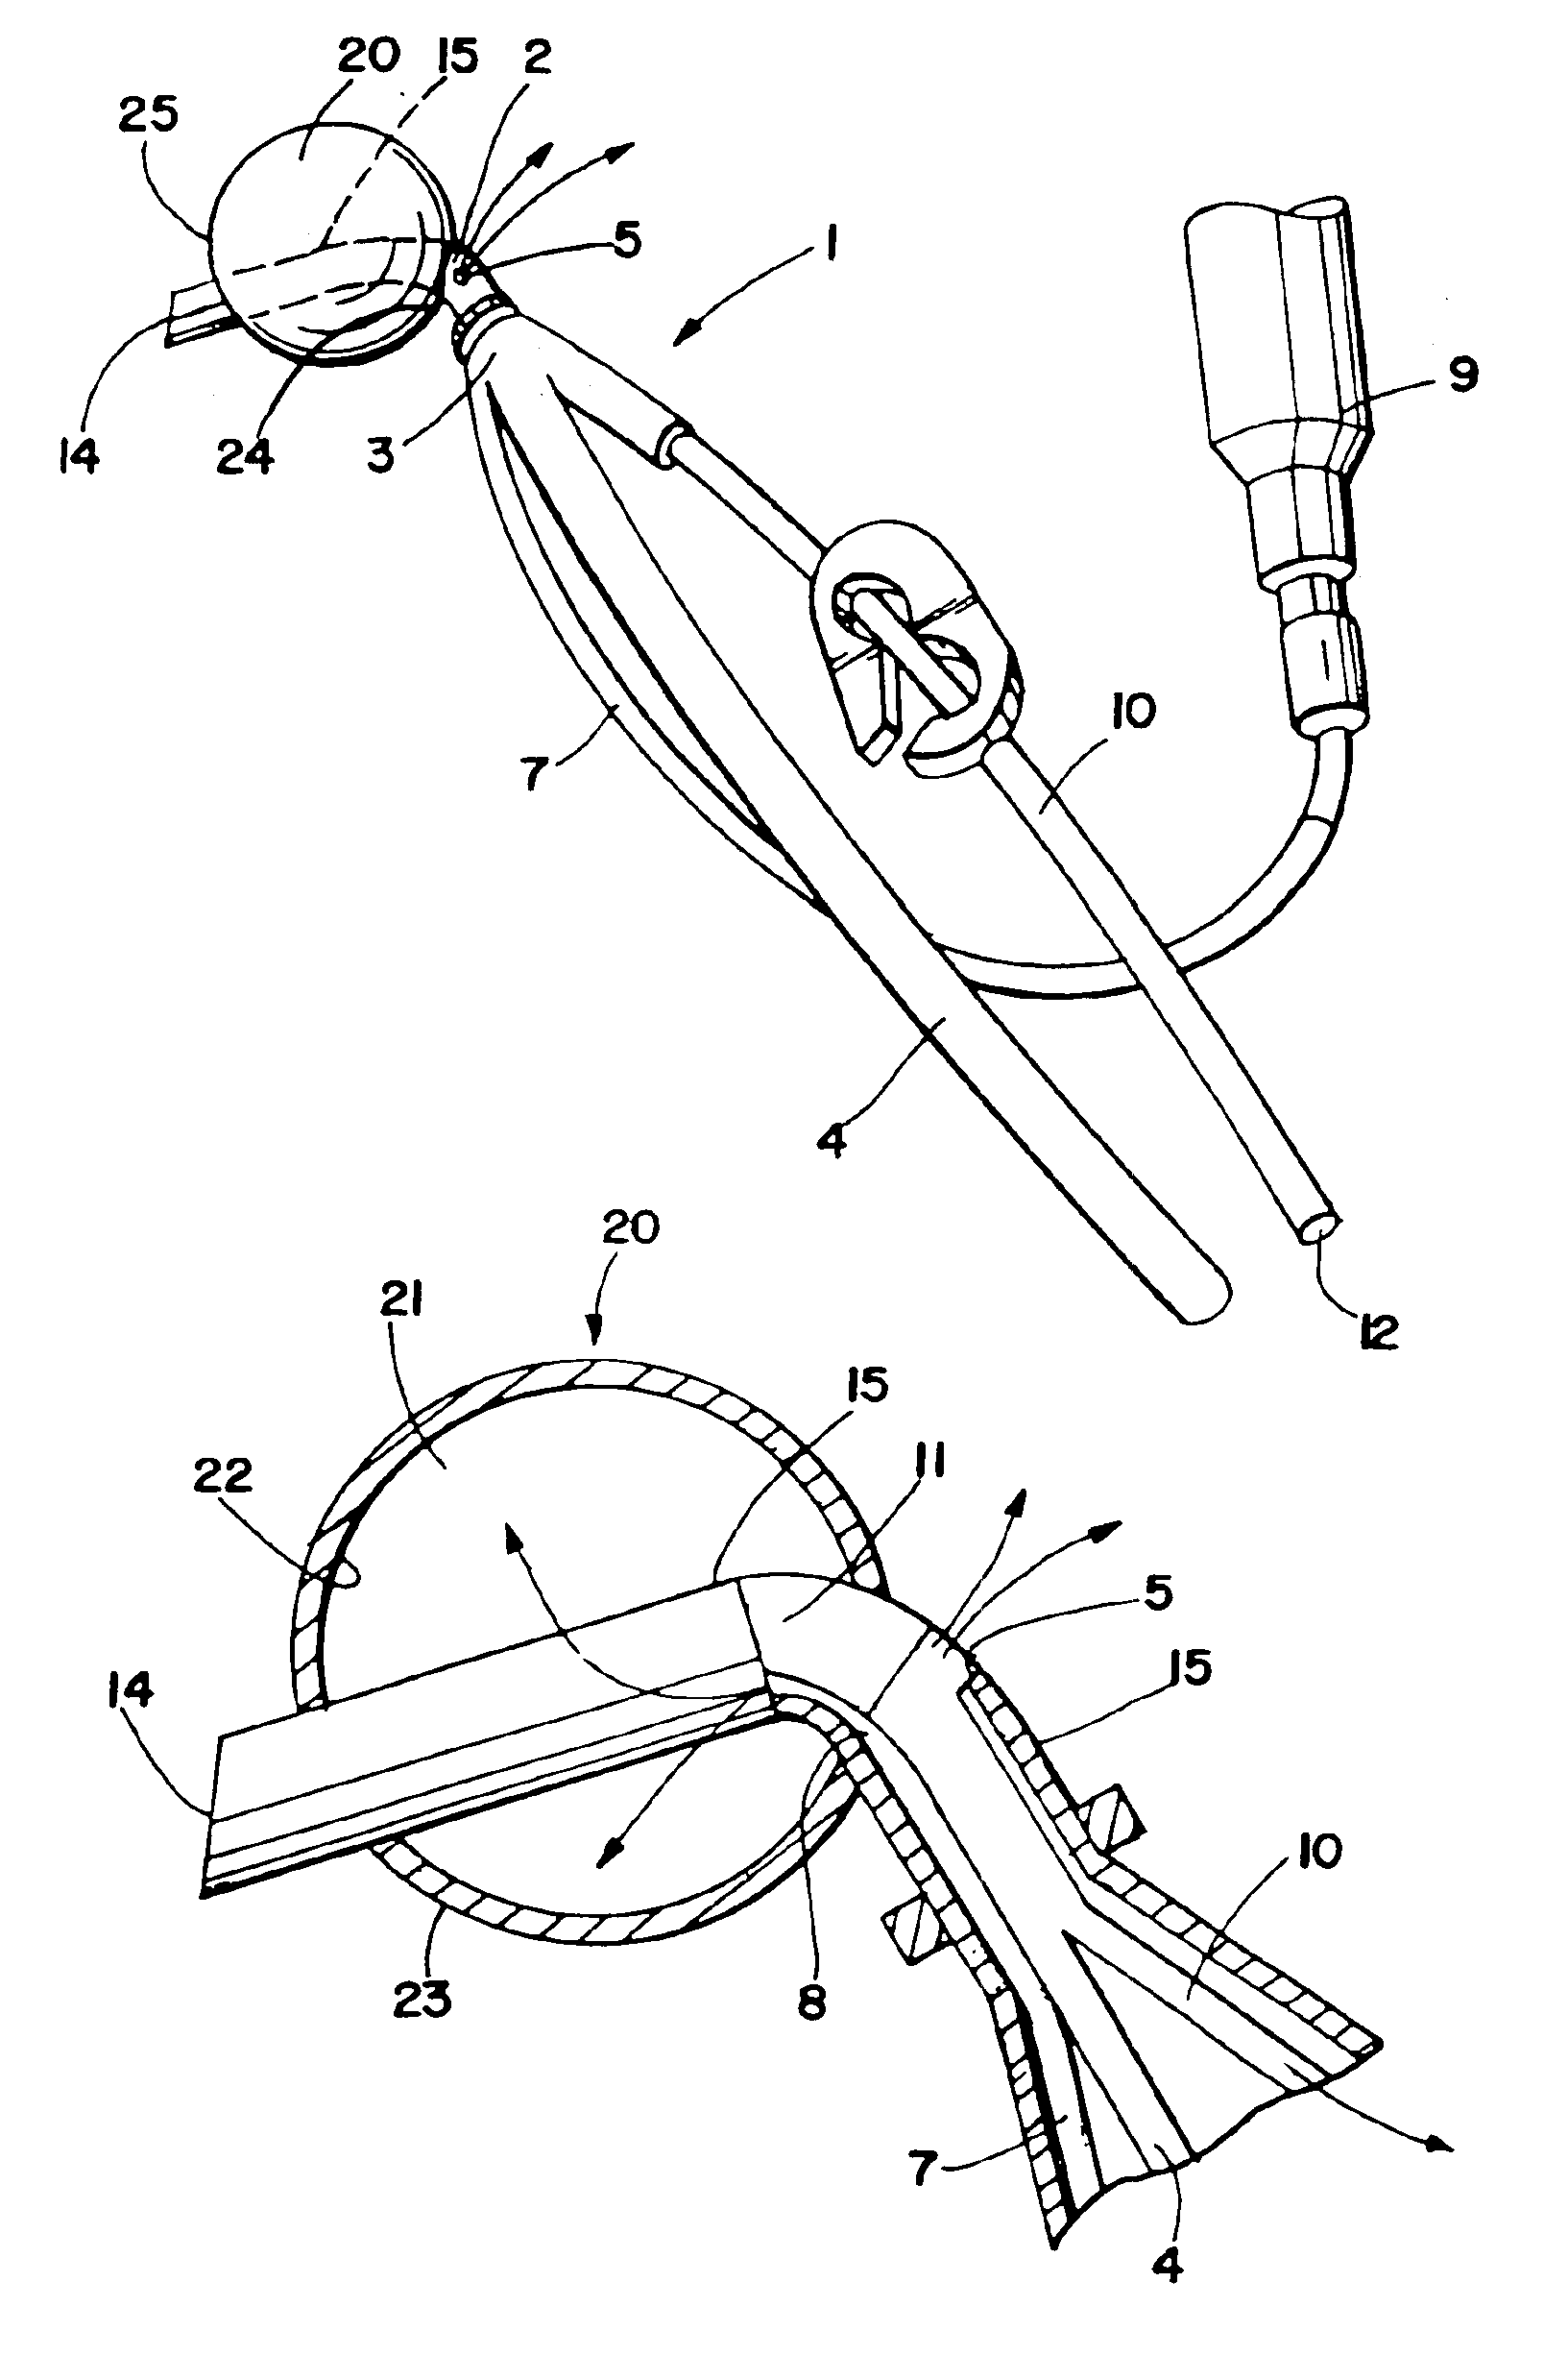 Balloon occlusion device and methods of use